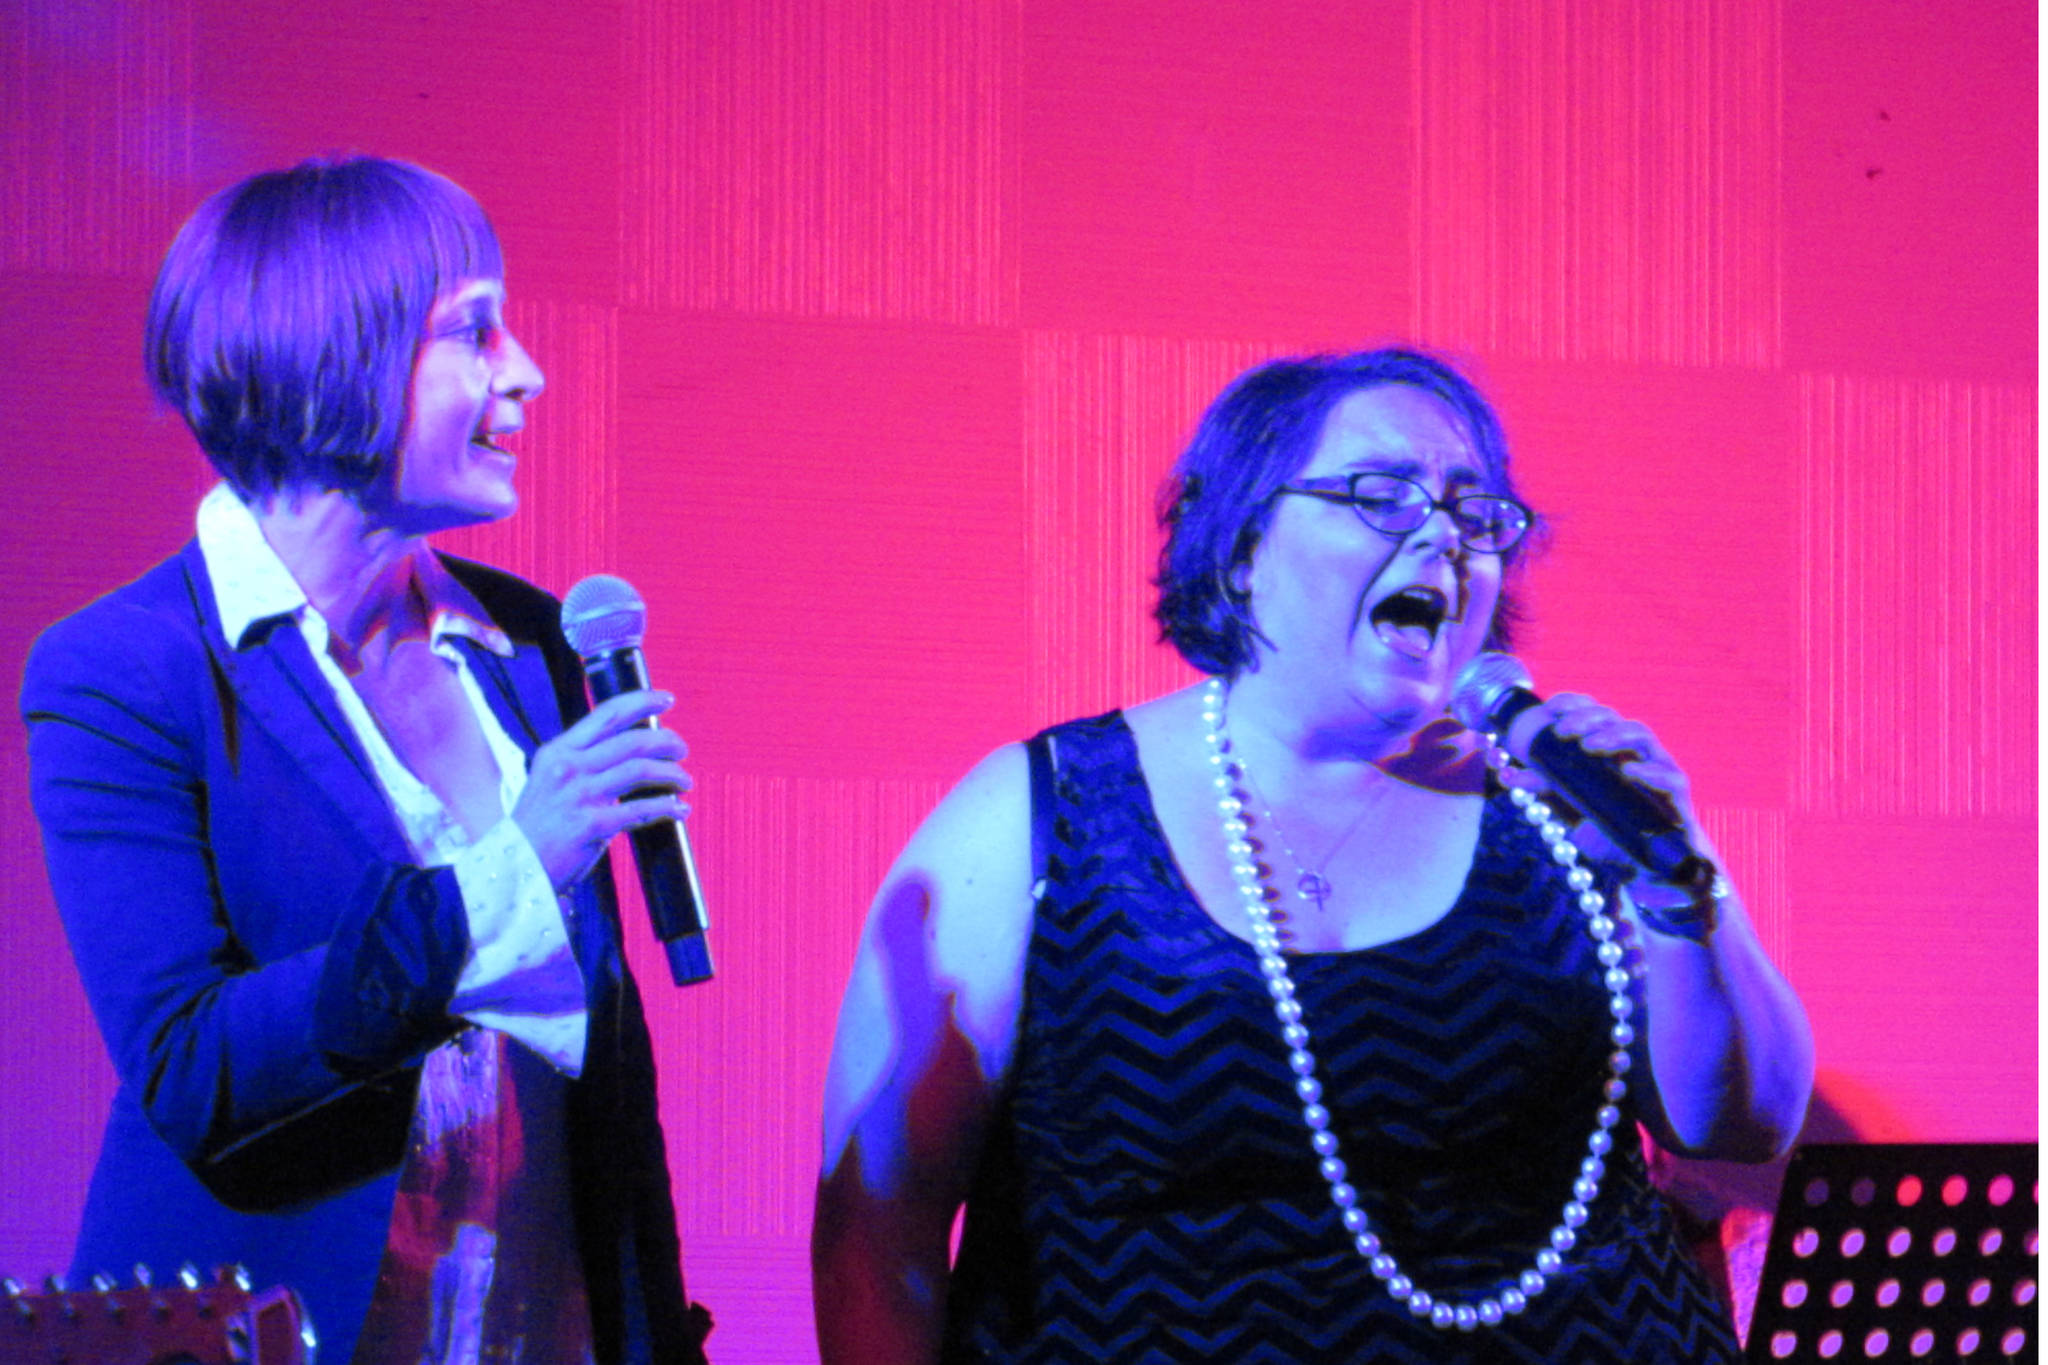 Susan Lewandowski and Collette Costa harmonize on stage during the Red Light Revue. Costa said on stage the pair have been singing together for decades and her friend traveled from Seattle to perform Saturday night. (Ben Hohenstatt | Capital City Weekly)